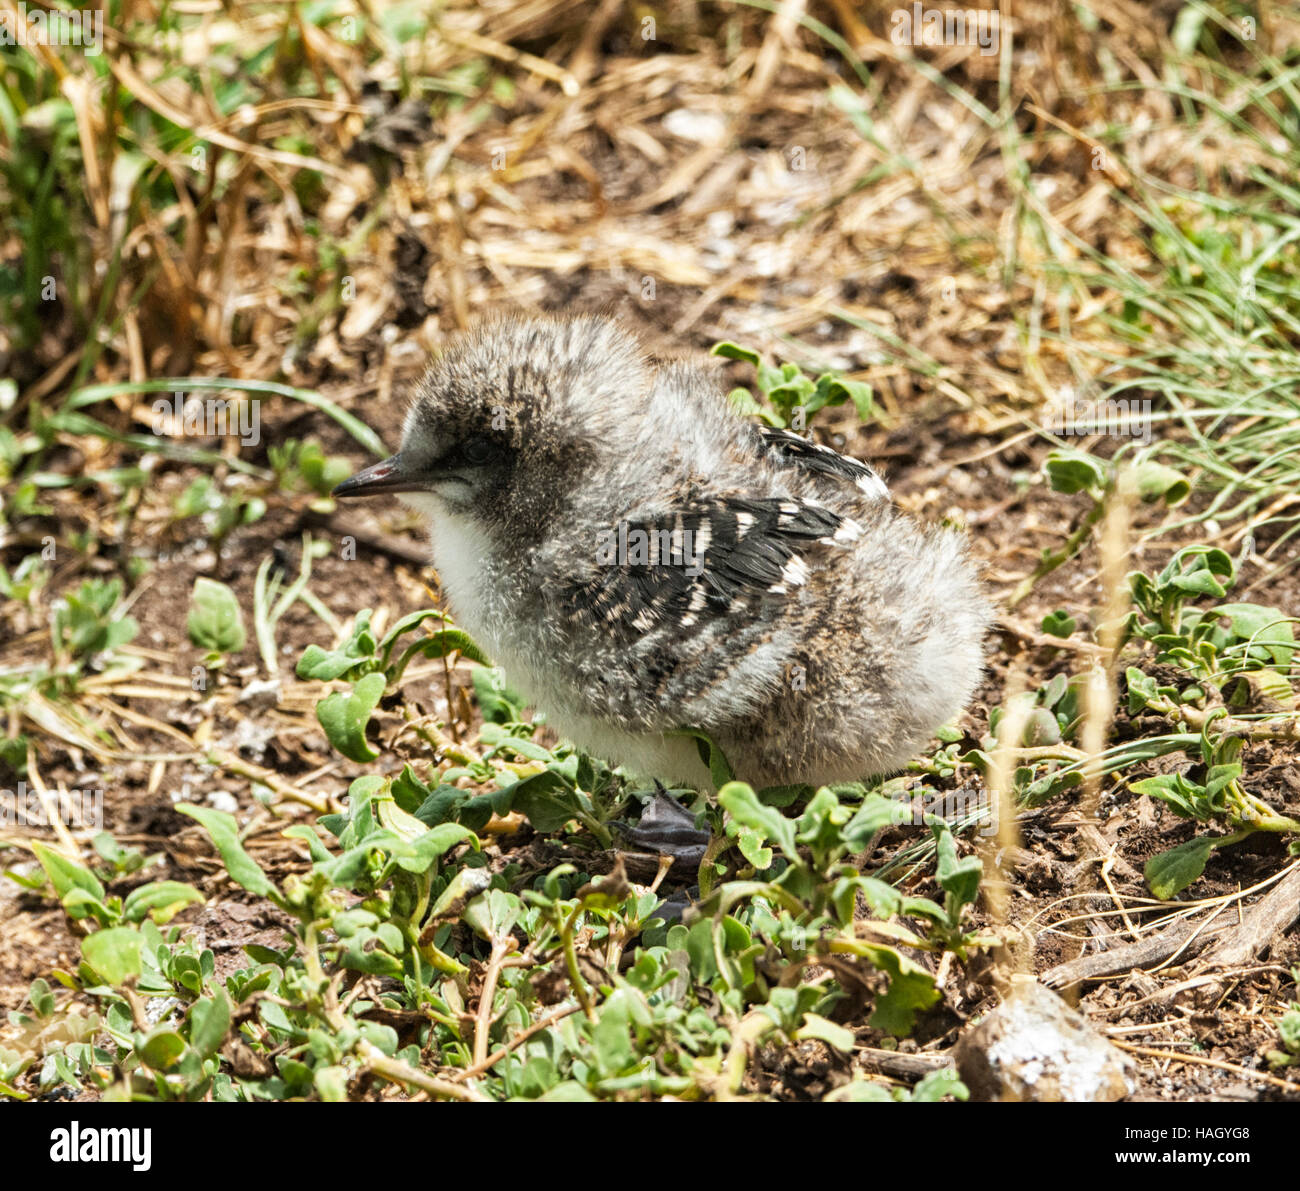 Very young Sooty Tern chick (Sterna fuscata), Lord Howe Island, New South Wales, NSW, Australia Stock Photo